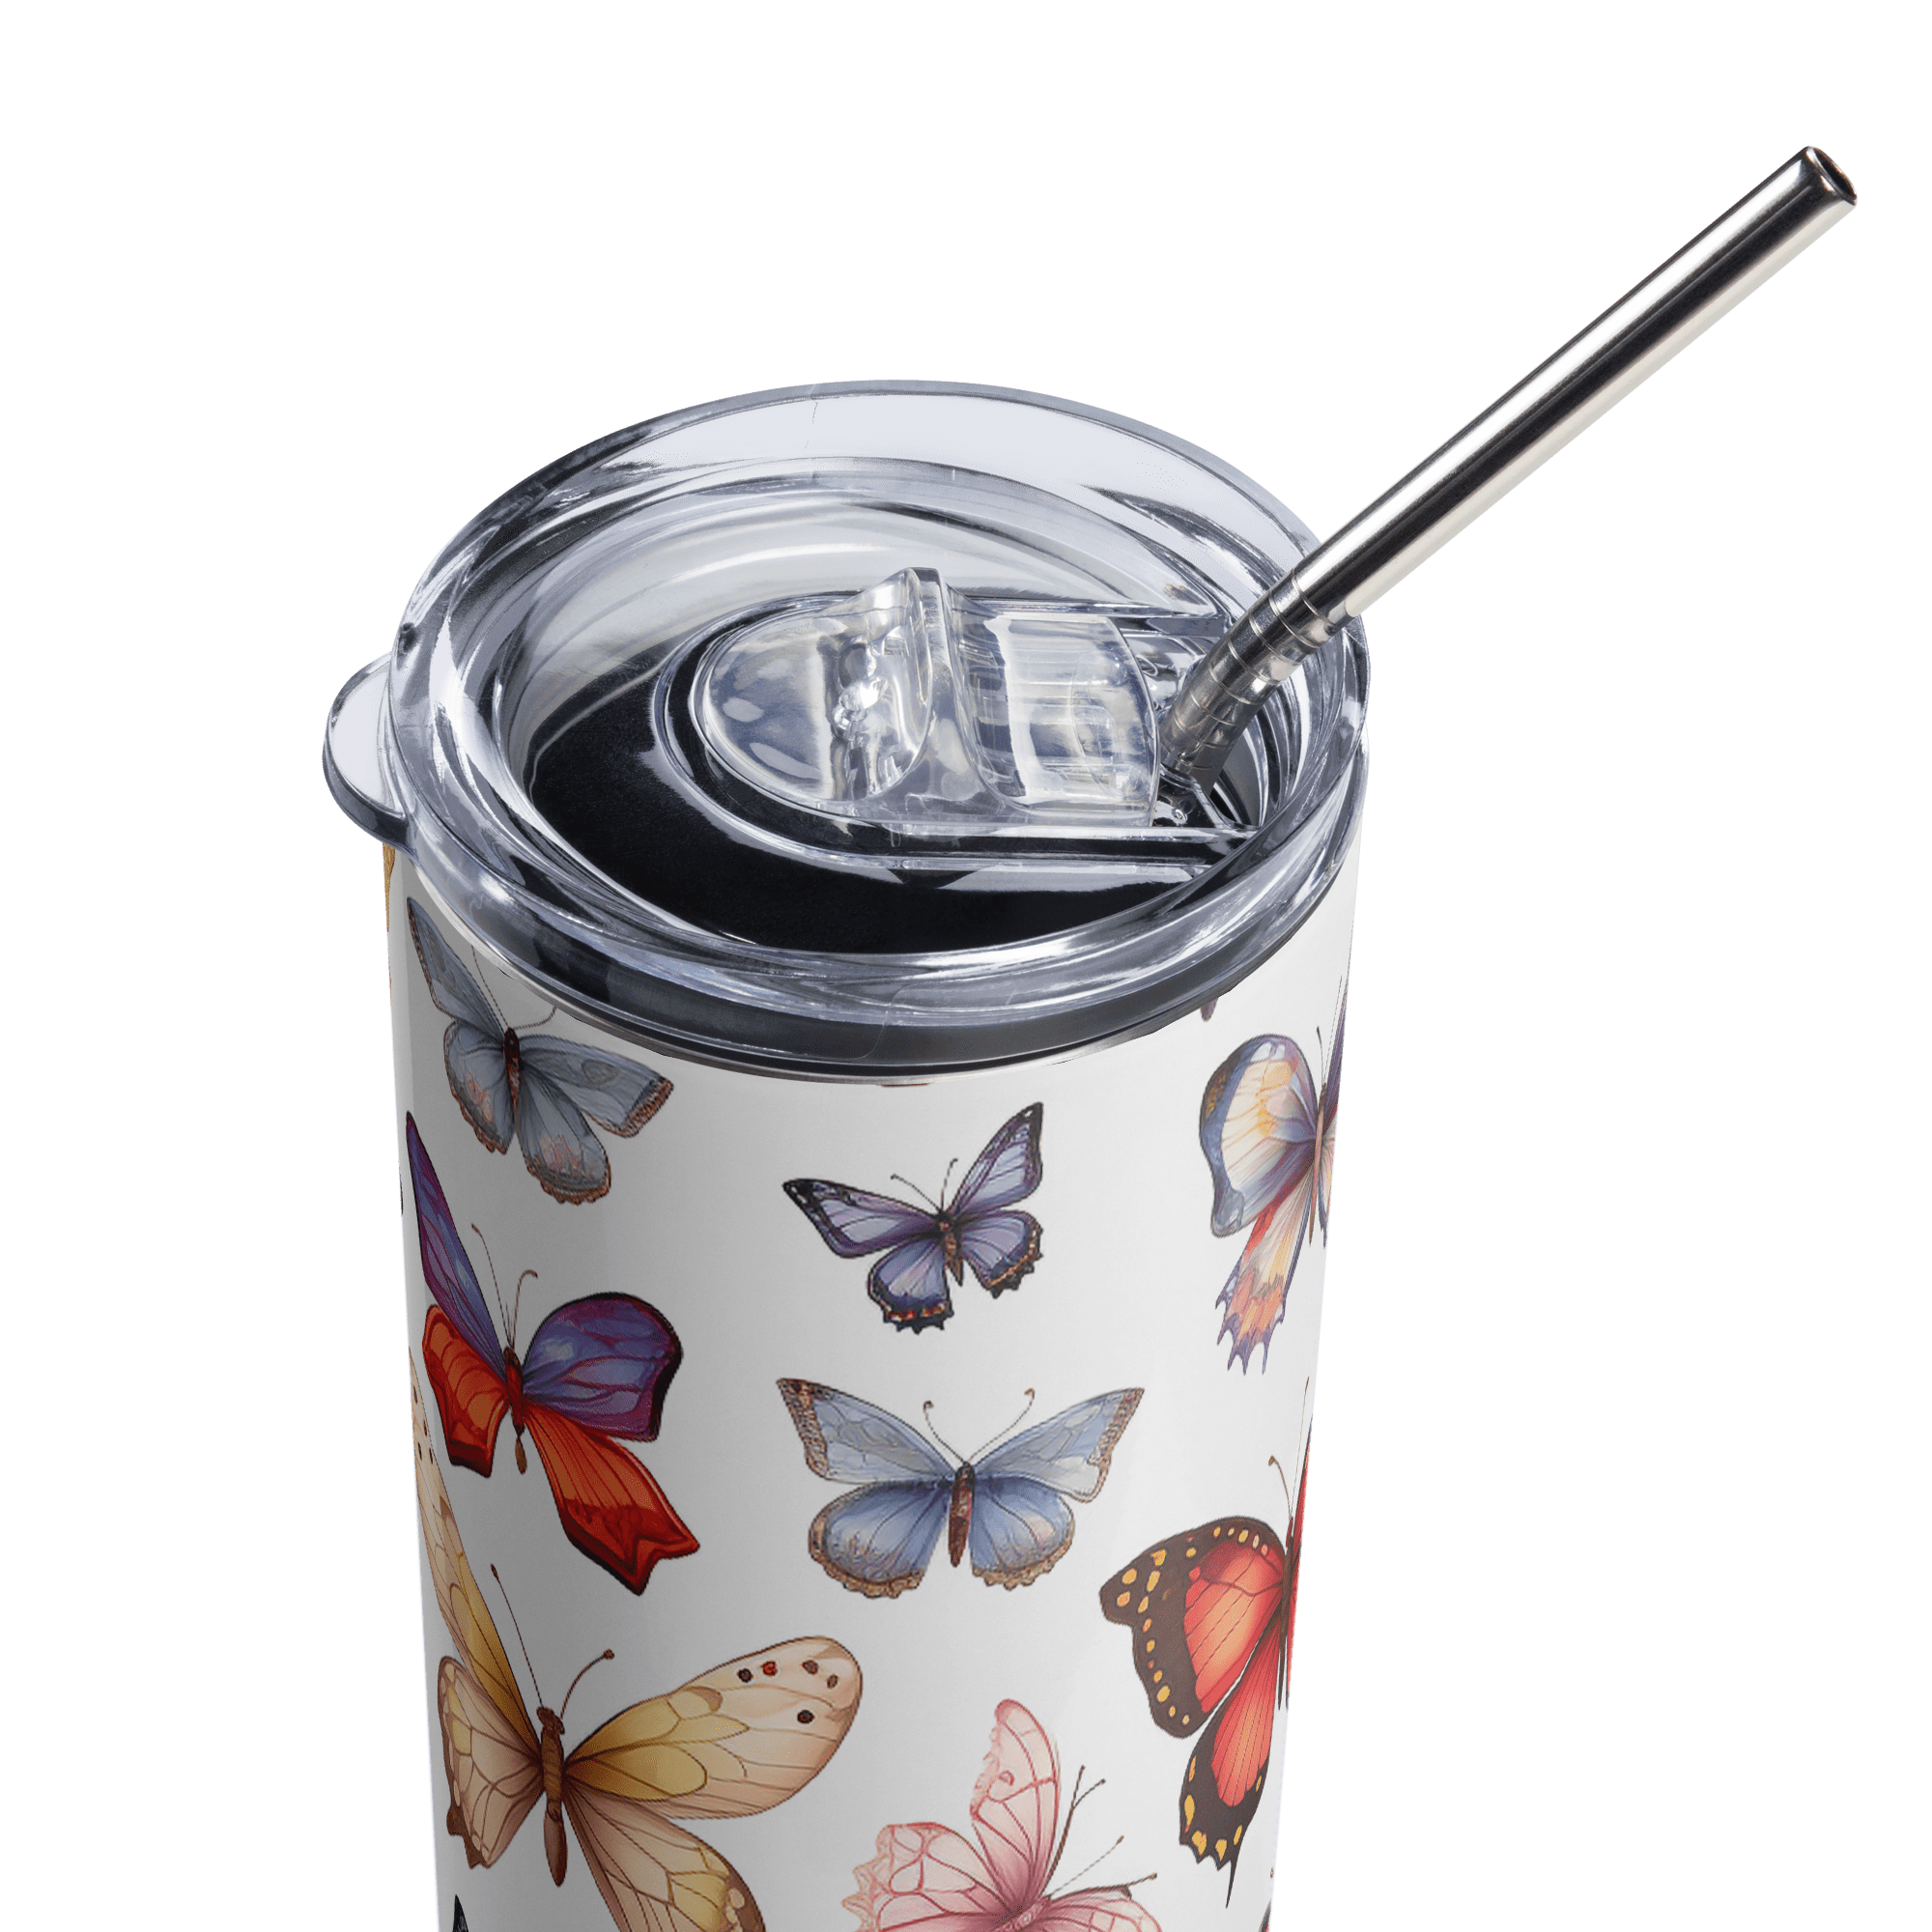 Butterflies Abound - 20oz. Tumbler with Stainless Steel Straw